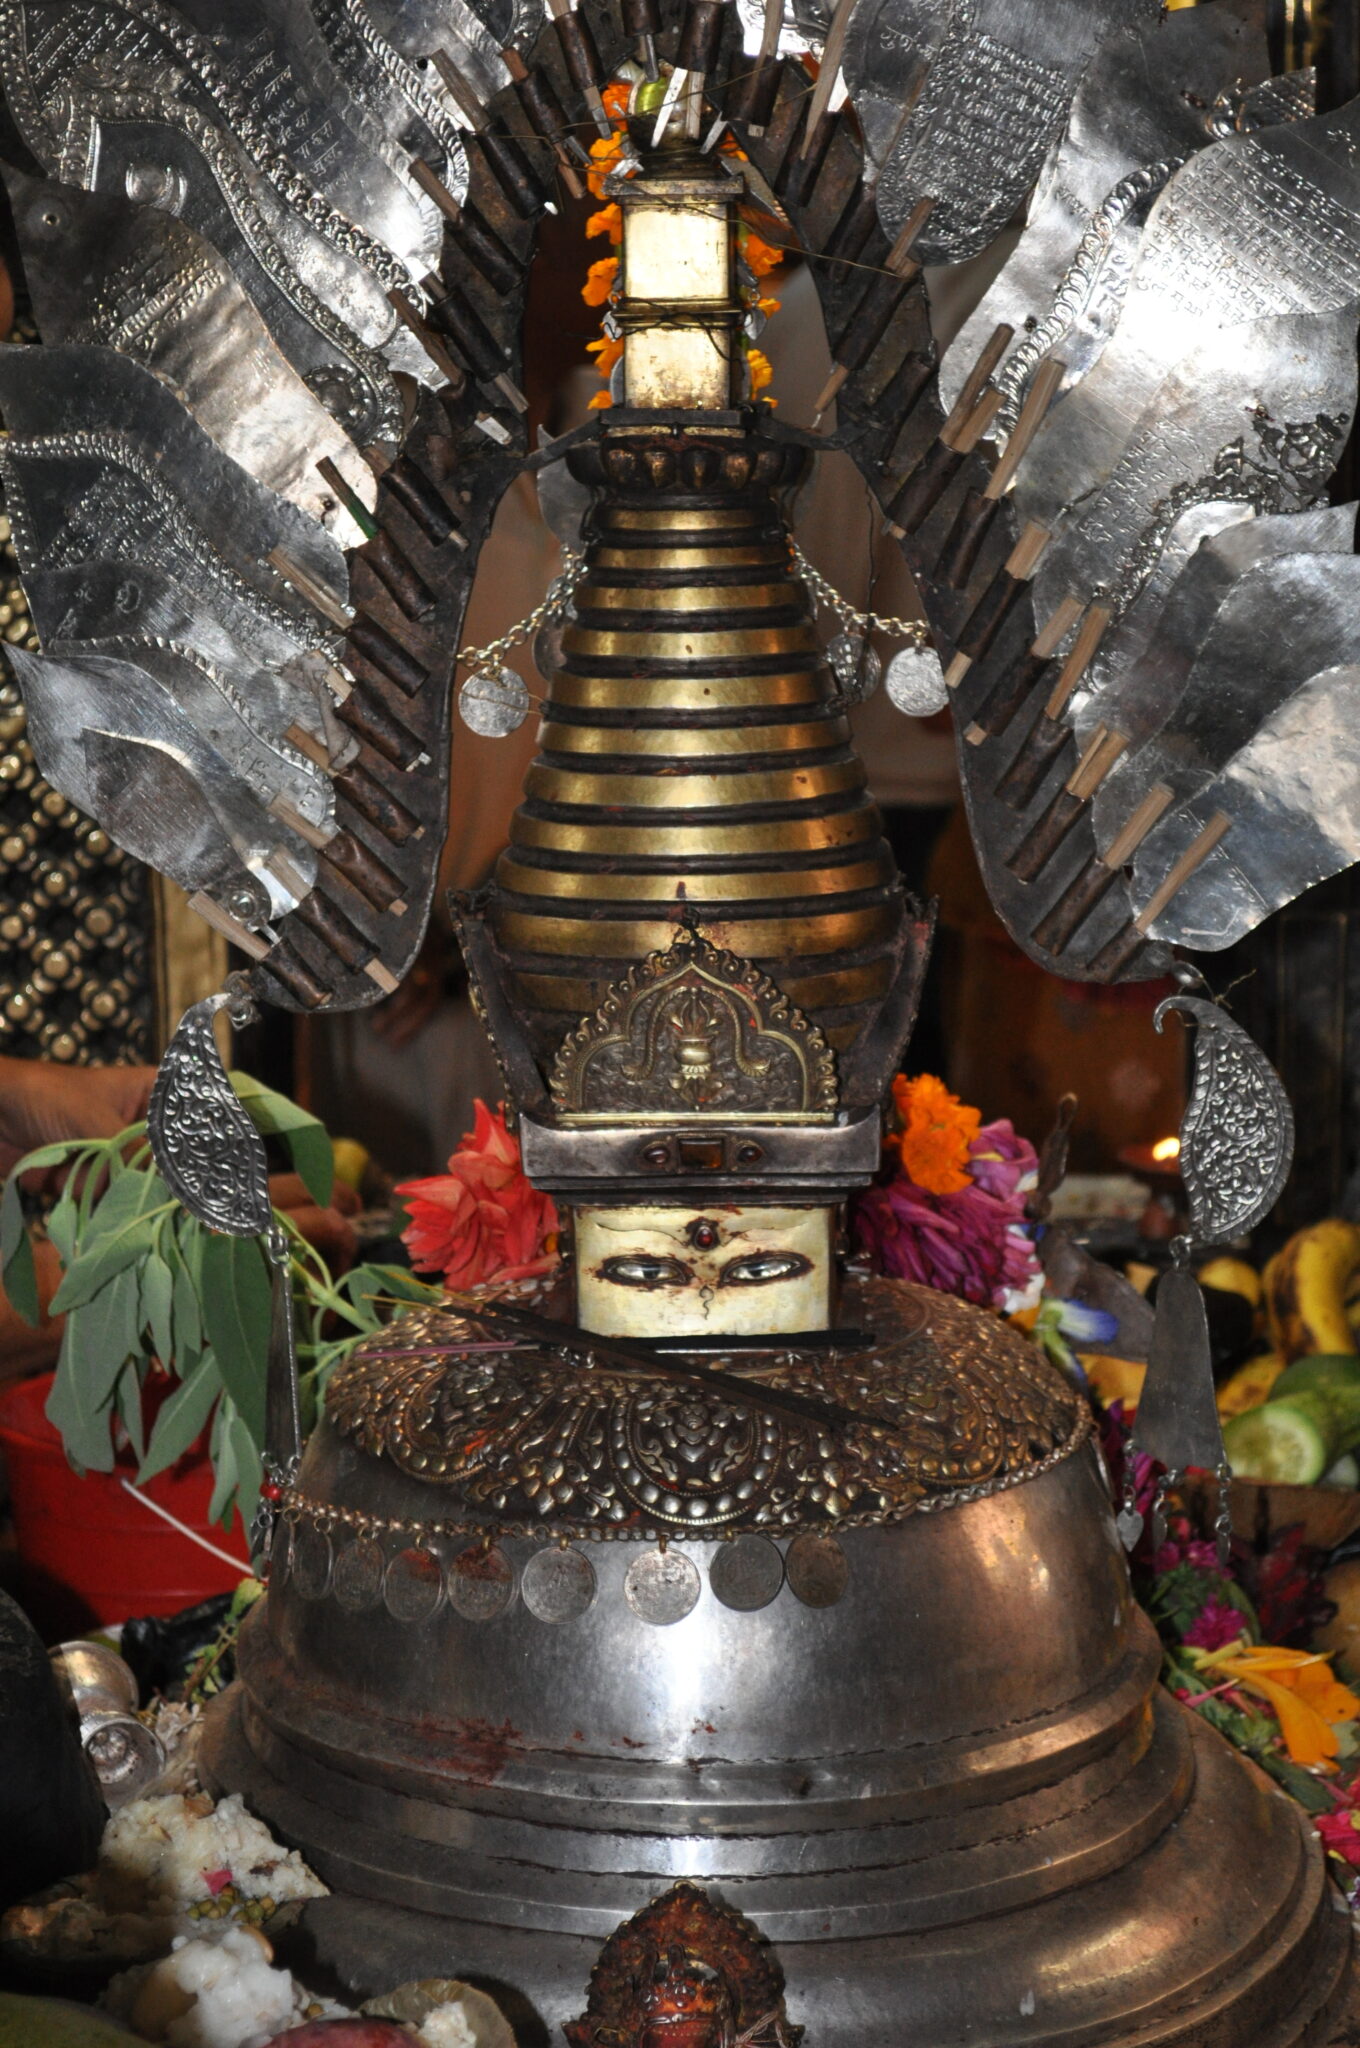 Silver- and bronze-colored metal devotional object in stupa shape; topped with silver feather-shaped ornaments